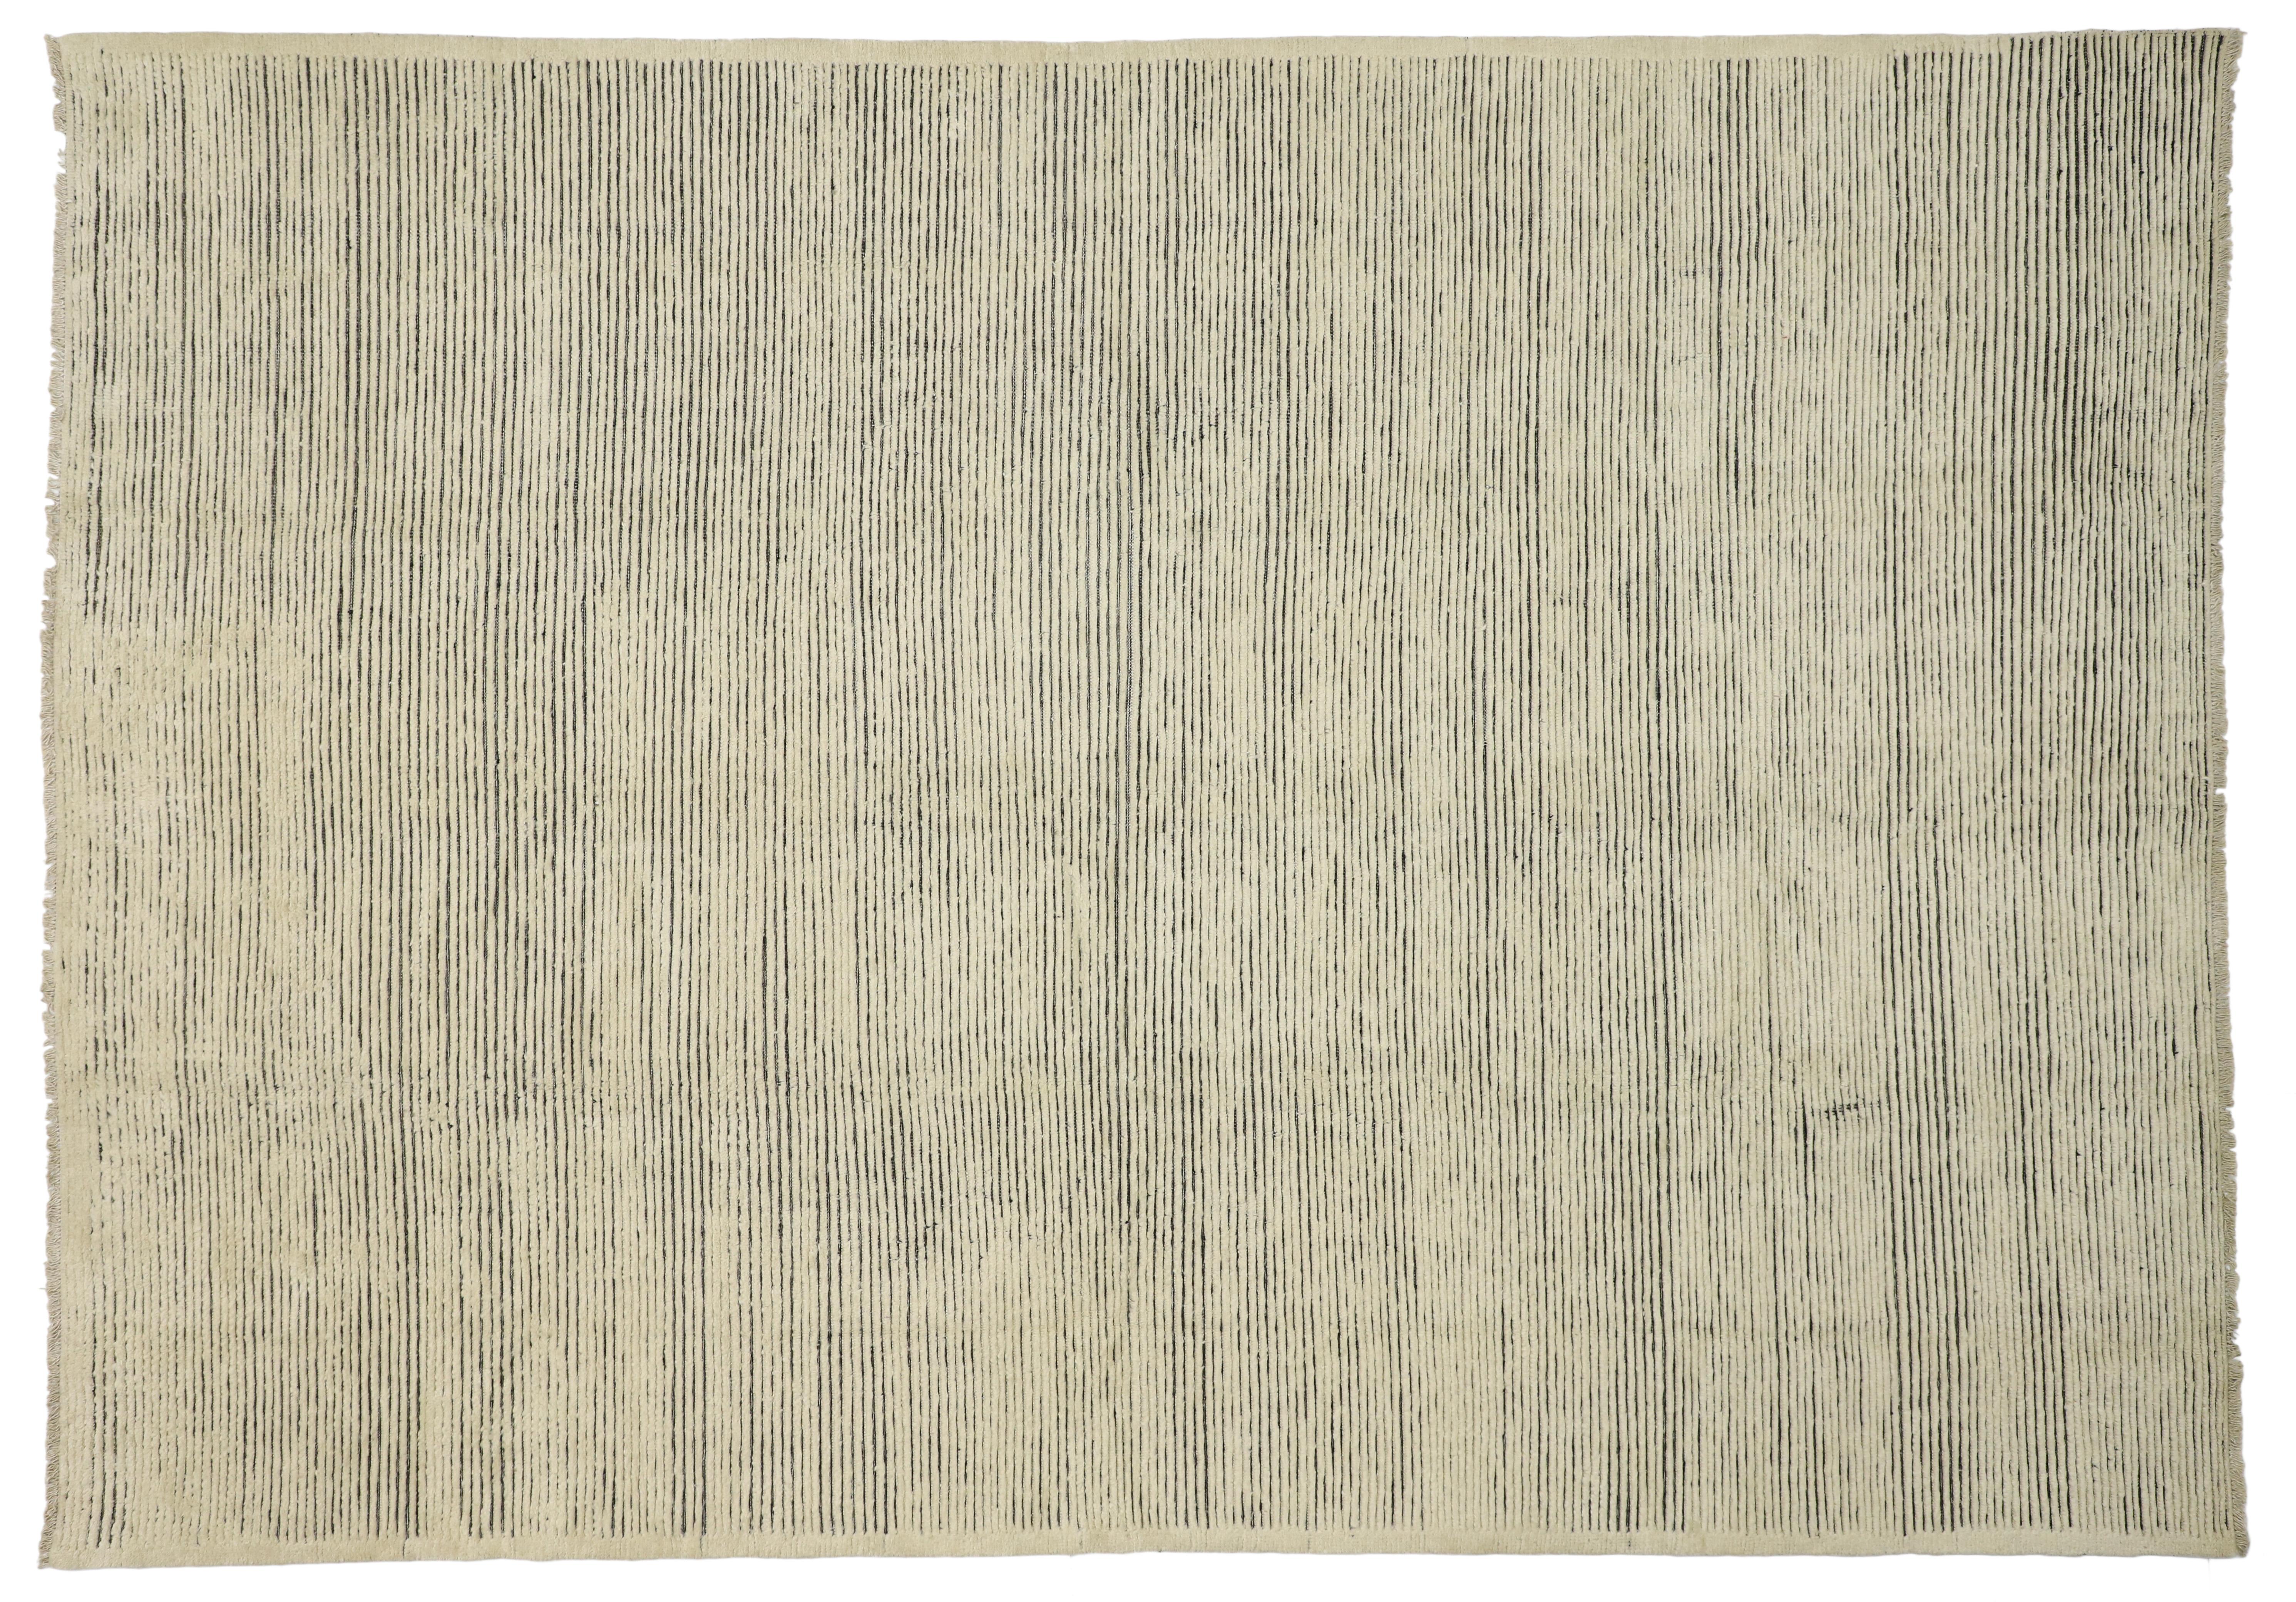 New Contemporary Moroccan Area Rug with Minimalist Organic Modern Style 3